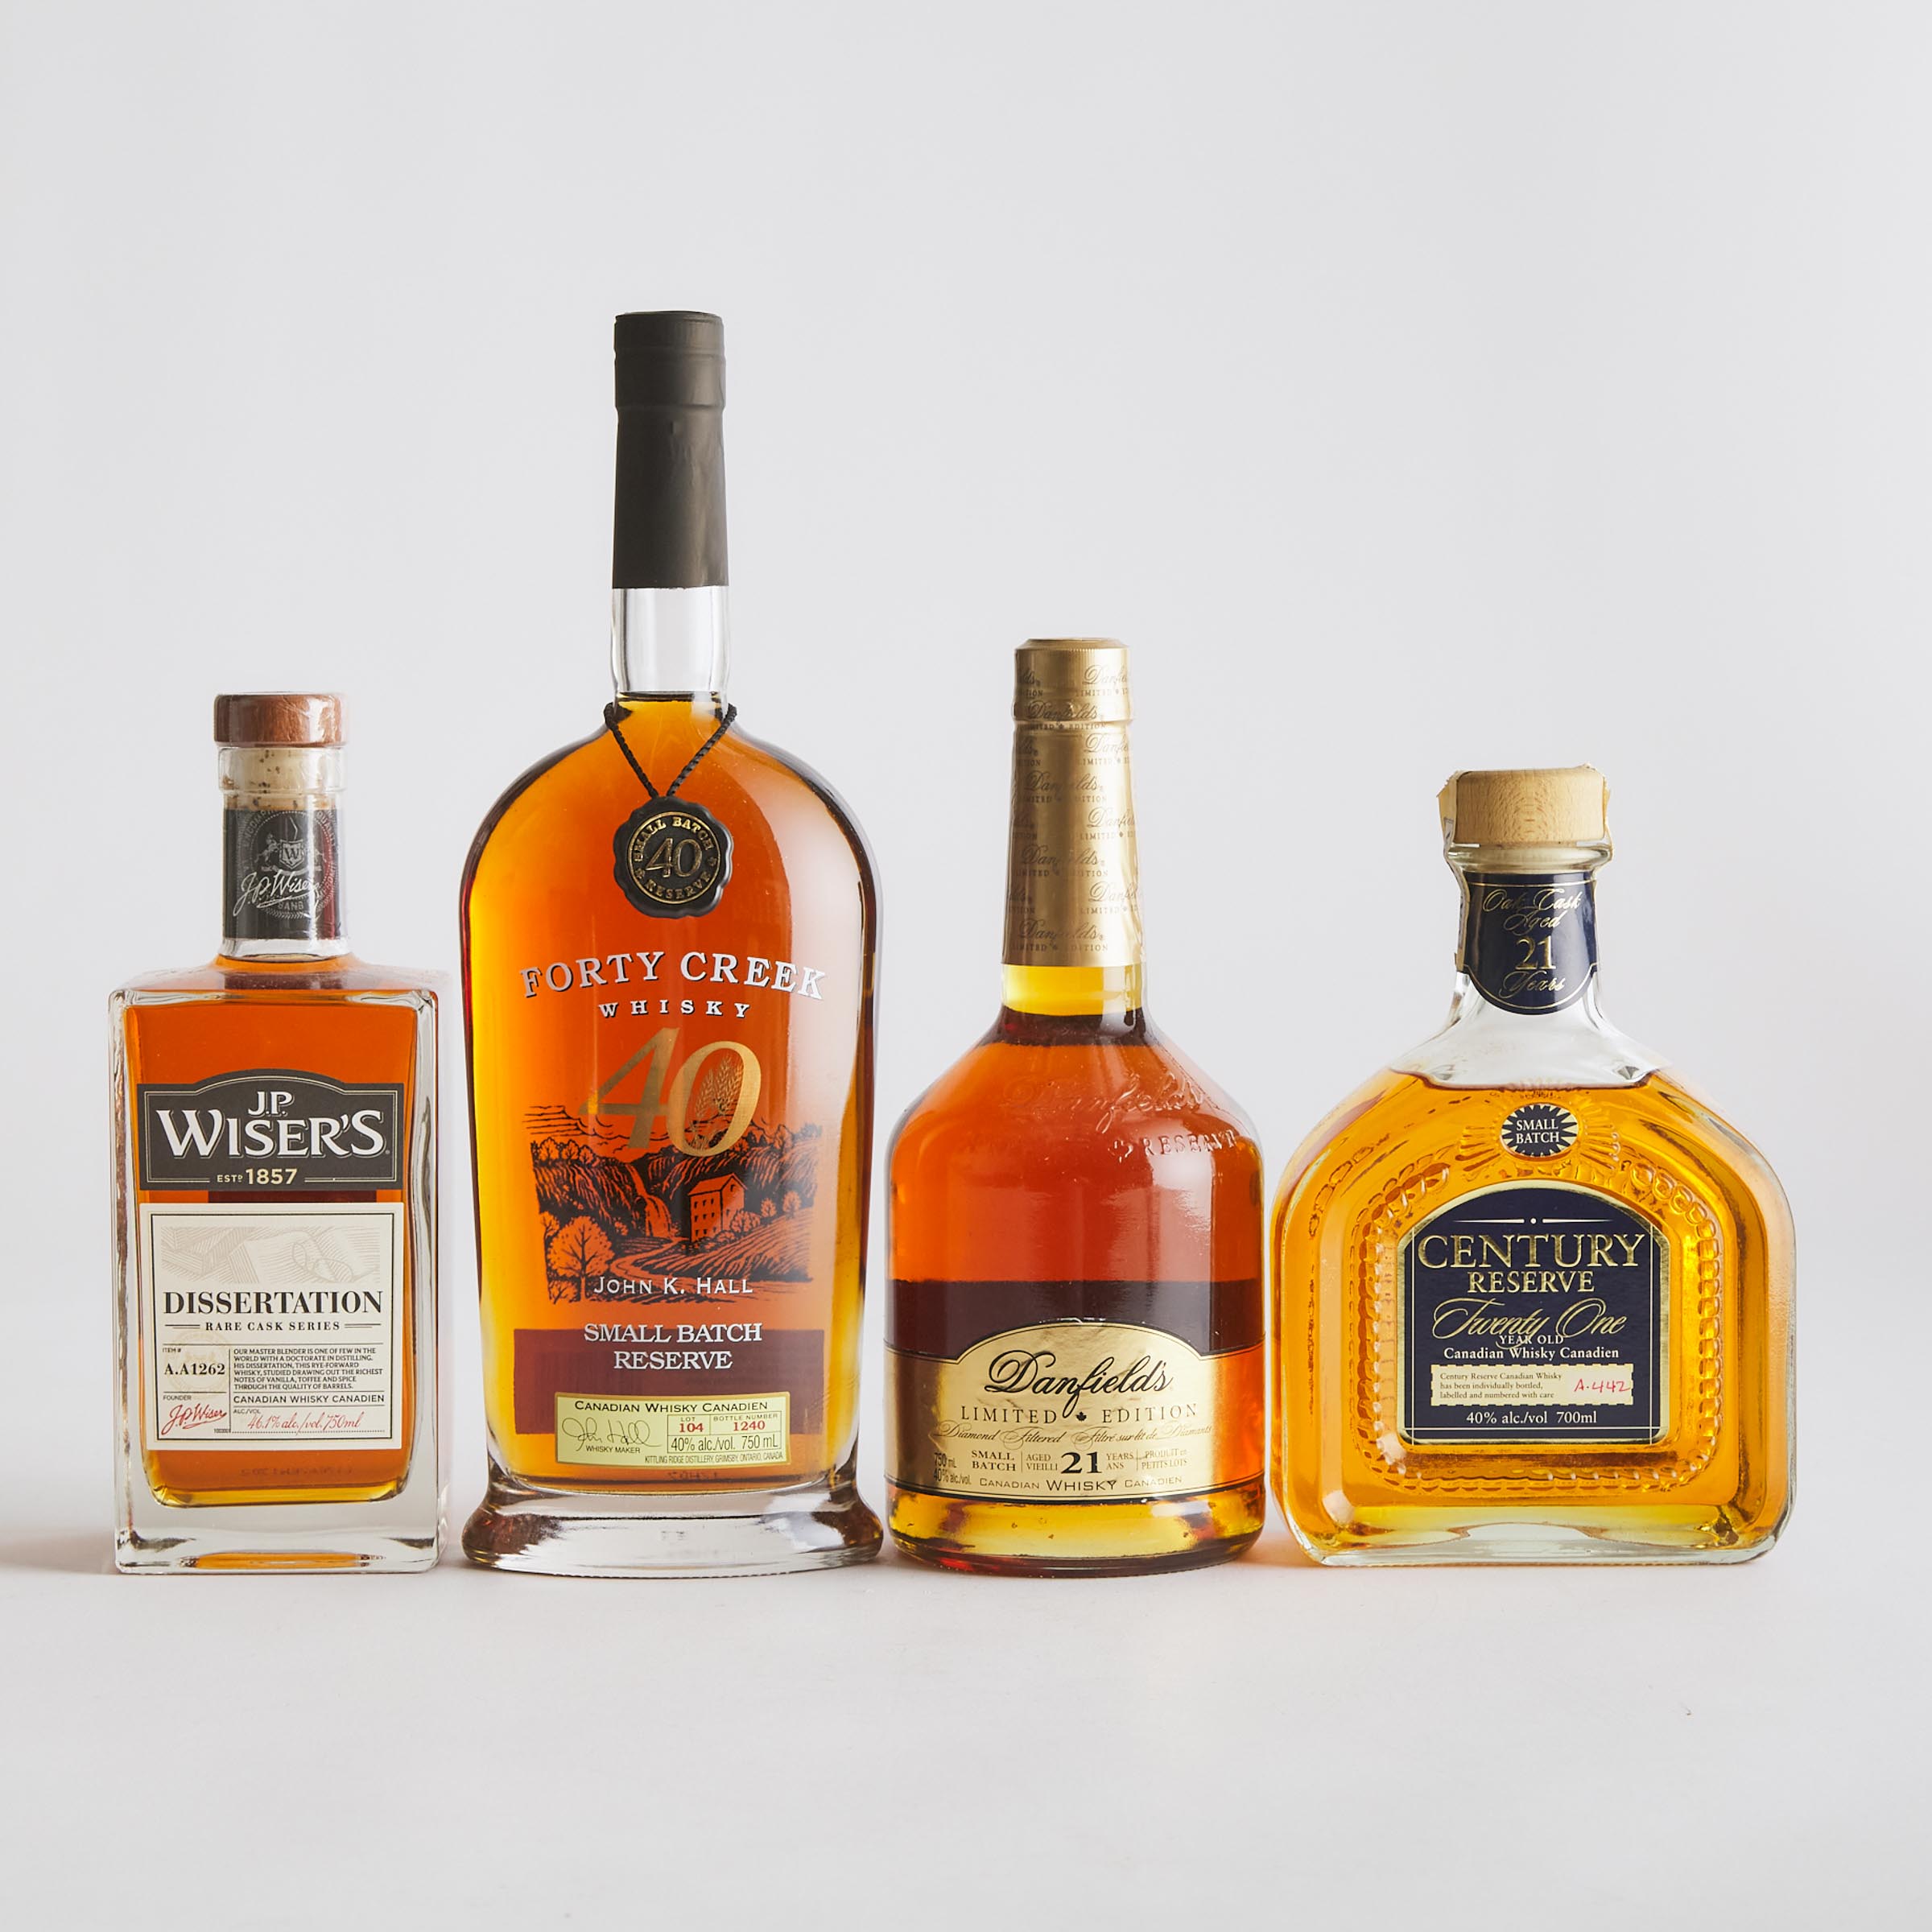 CENTURY RESERVE CANADIAN WHISKY 21 YEARS (ONE 700 ML)
DANFIELD'S CANADIAN WHISKY 21 YEARS (ONE 750 ML)
FORTY CREEK RESERVE CANADIAN WHISKY (ONE 750 ML)
J.P. WISER'S CANADIAN WHISKY (ONE 750 ML)